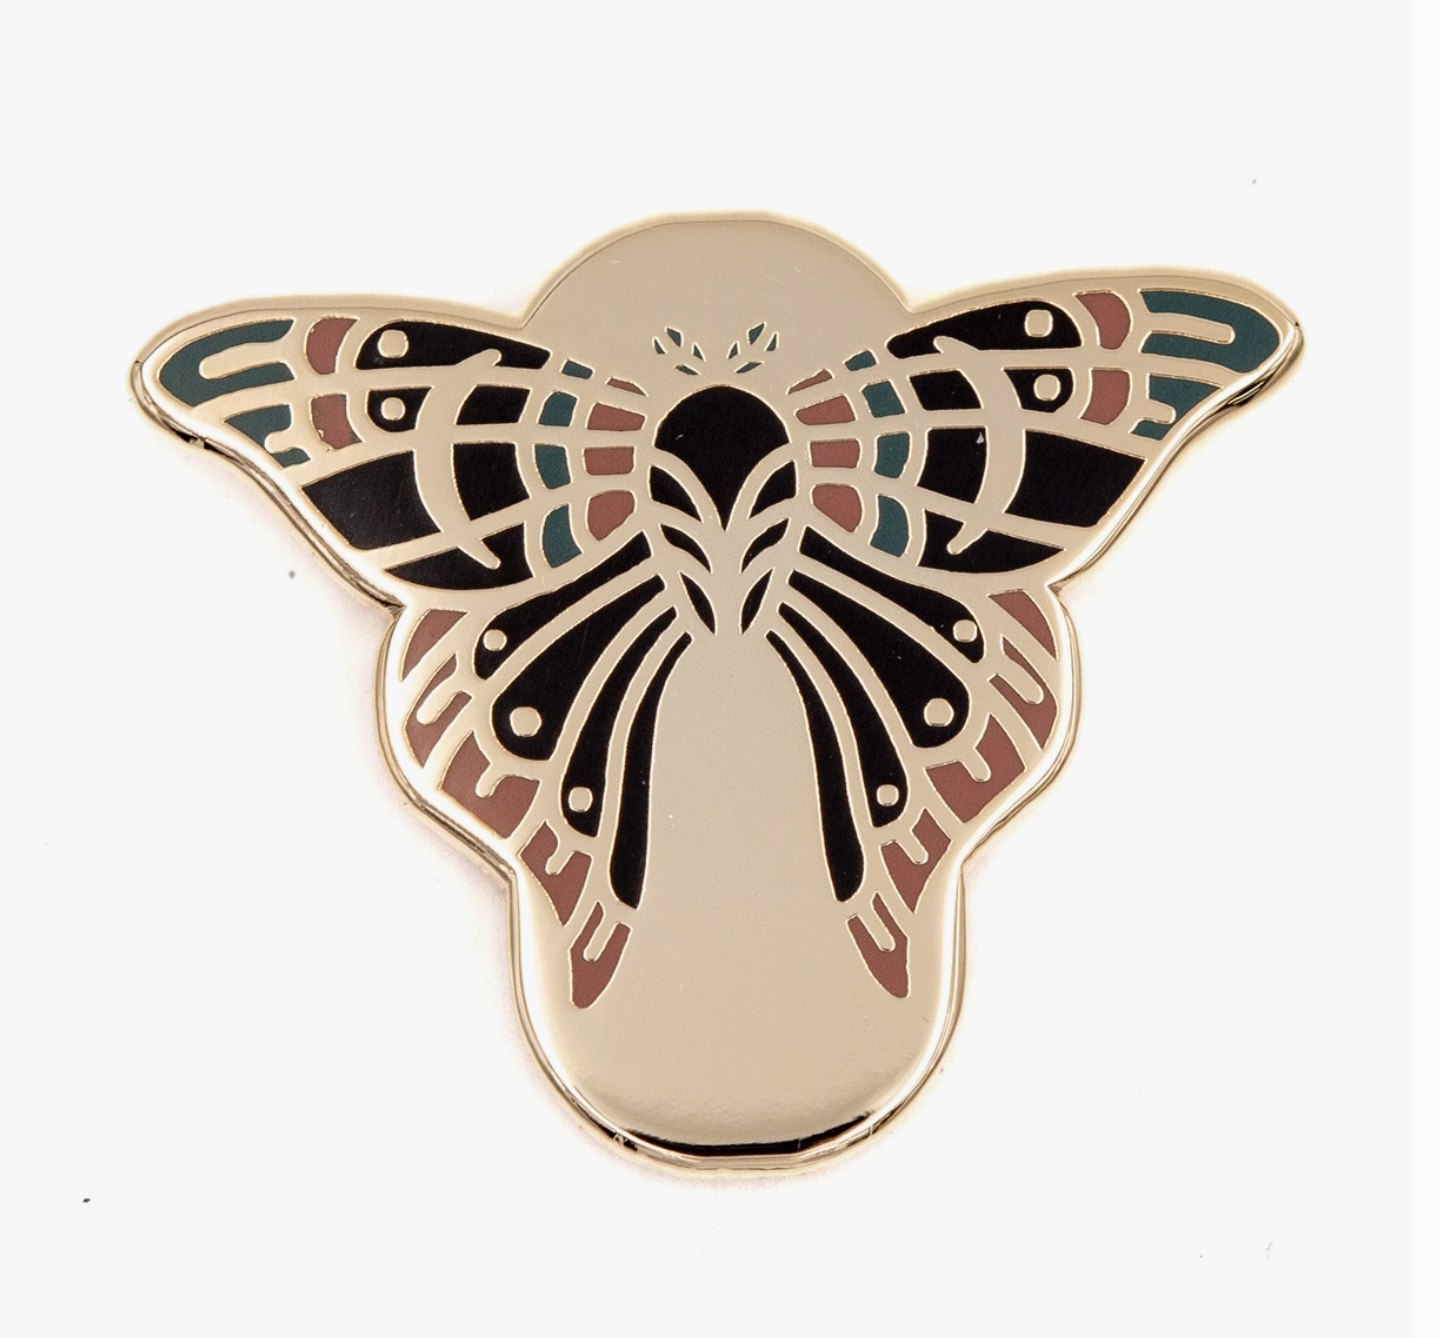 Moth Brooch - Enamel Pin by These Are Things